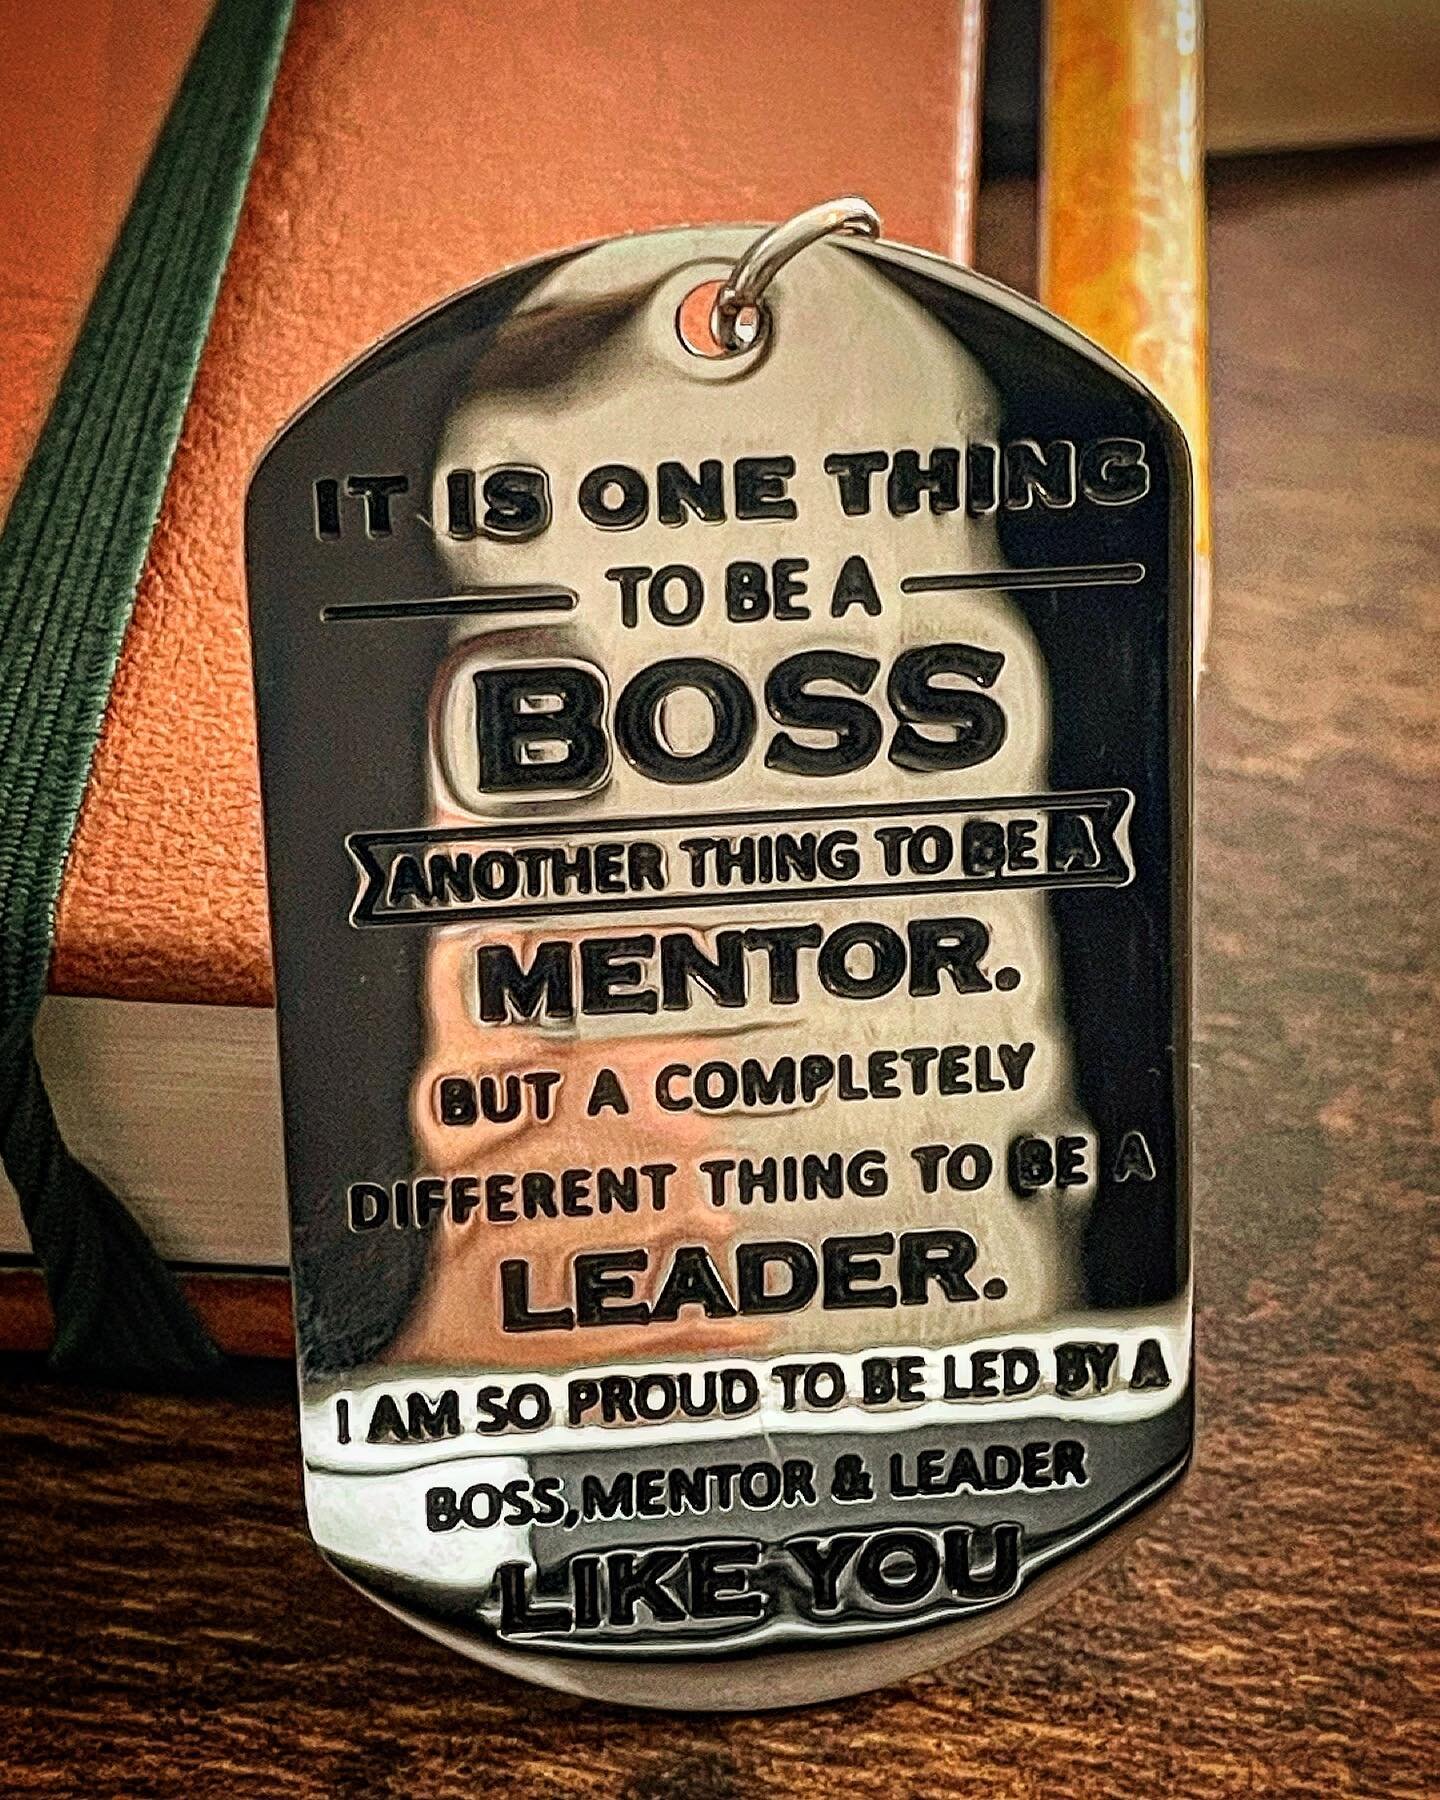 It&rsquo;s the little things that mean the most&hellip; Received this wonderful keychain from one of my executive leaders&hellip; If you think you&rsquo;re not having impact on people, you better think again and you better make sure that it&rsquo;s p